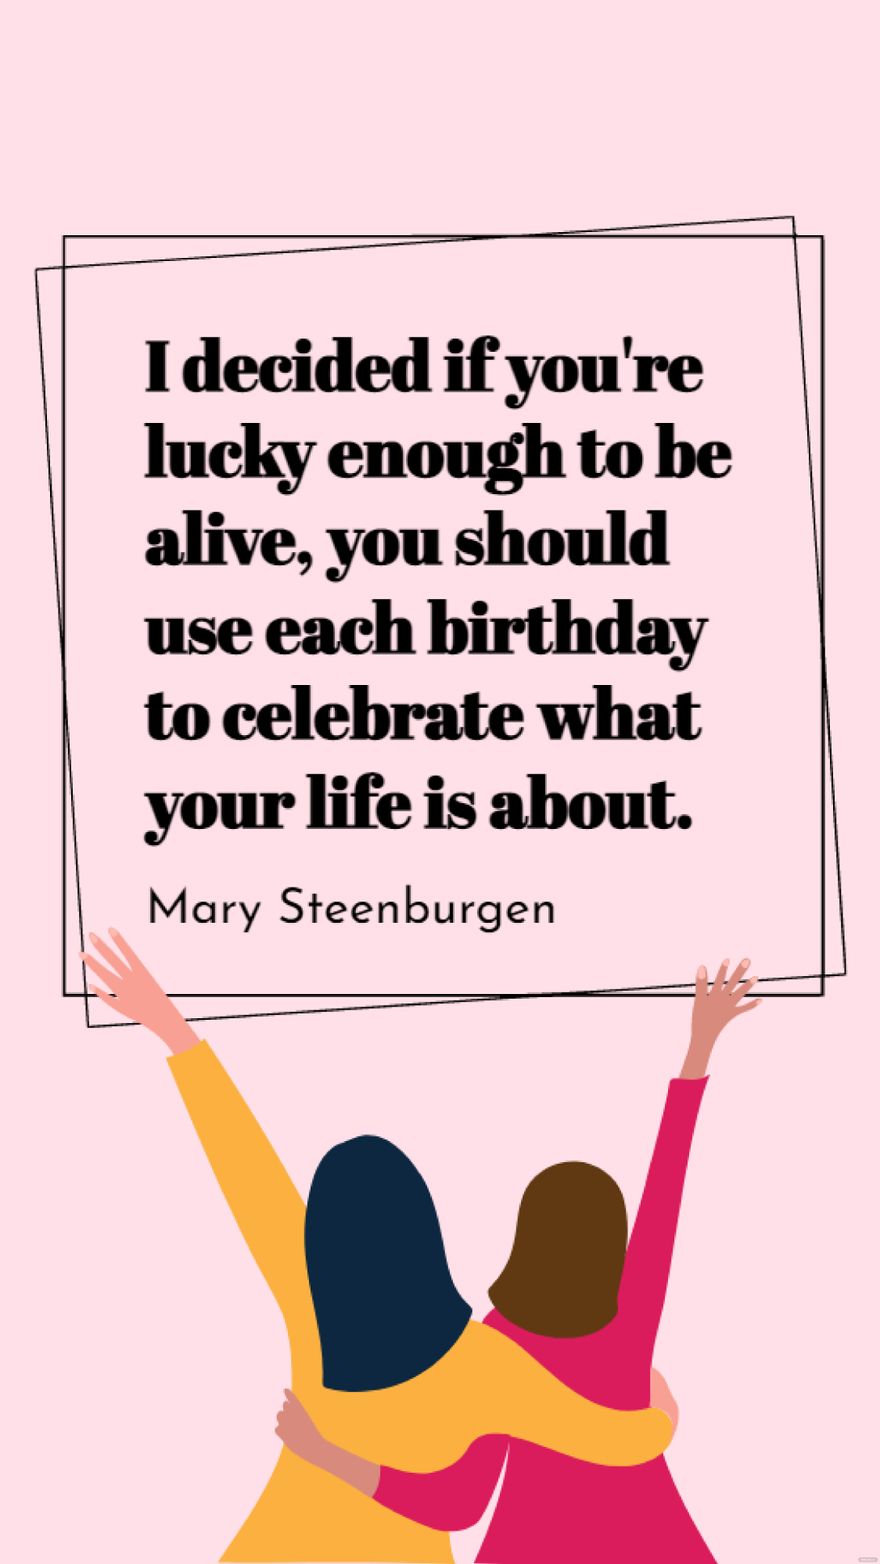 Mary Steenburgen - I decided if you're lucky enough to be alive, you should use each birthday to celebrate what your life is about.